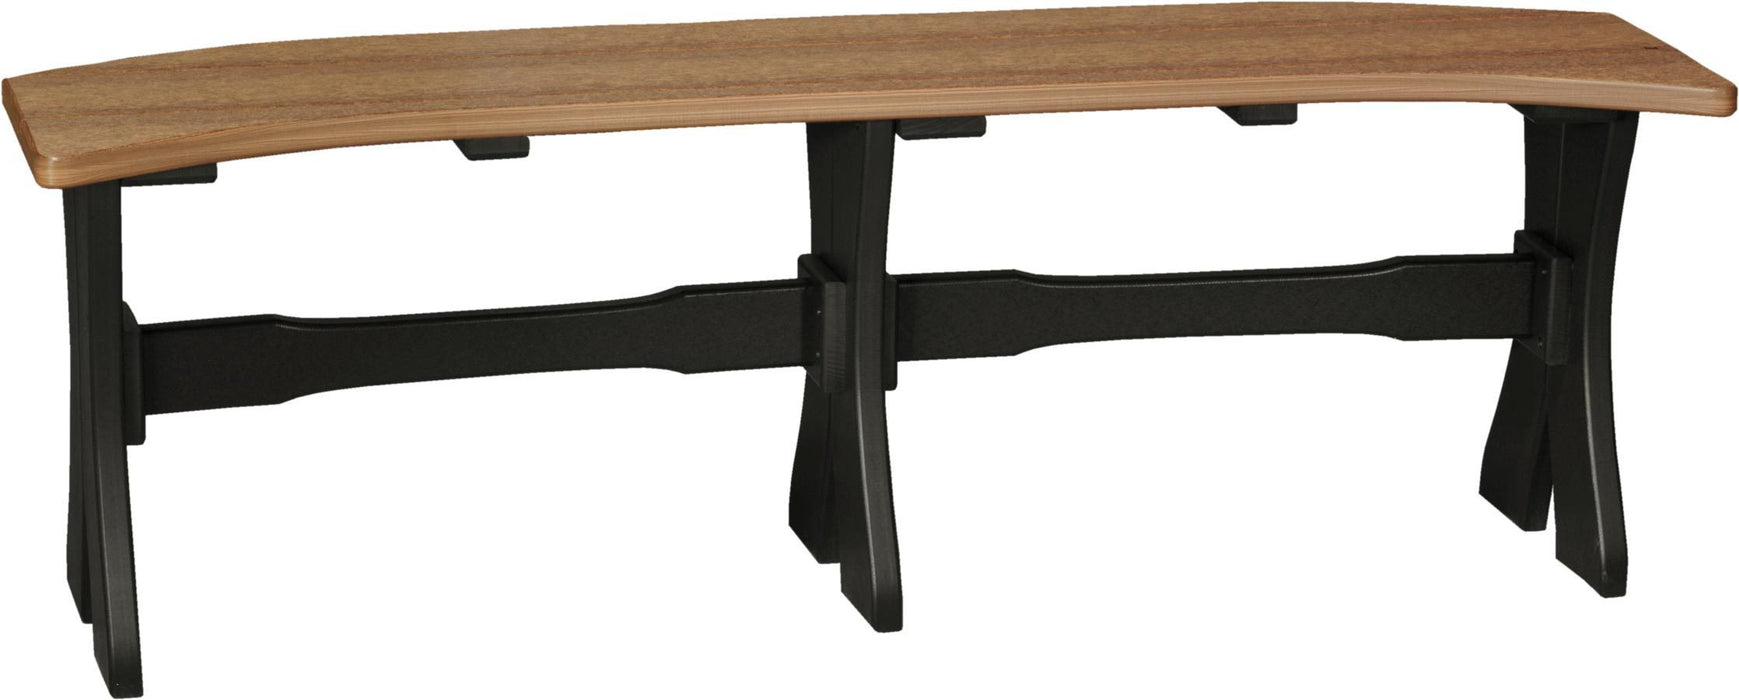 LuxCraft LuxCraft Weatherwood Recycled Plastic Table Bench With Cup Holder Bench